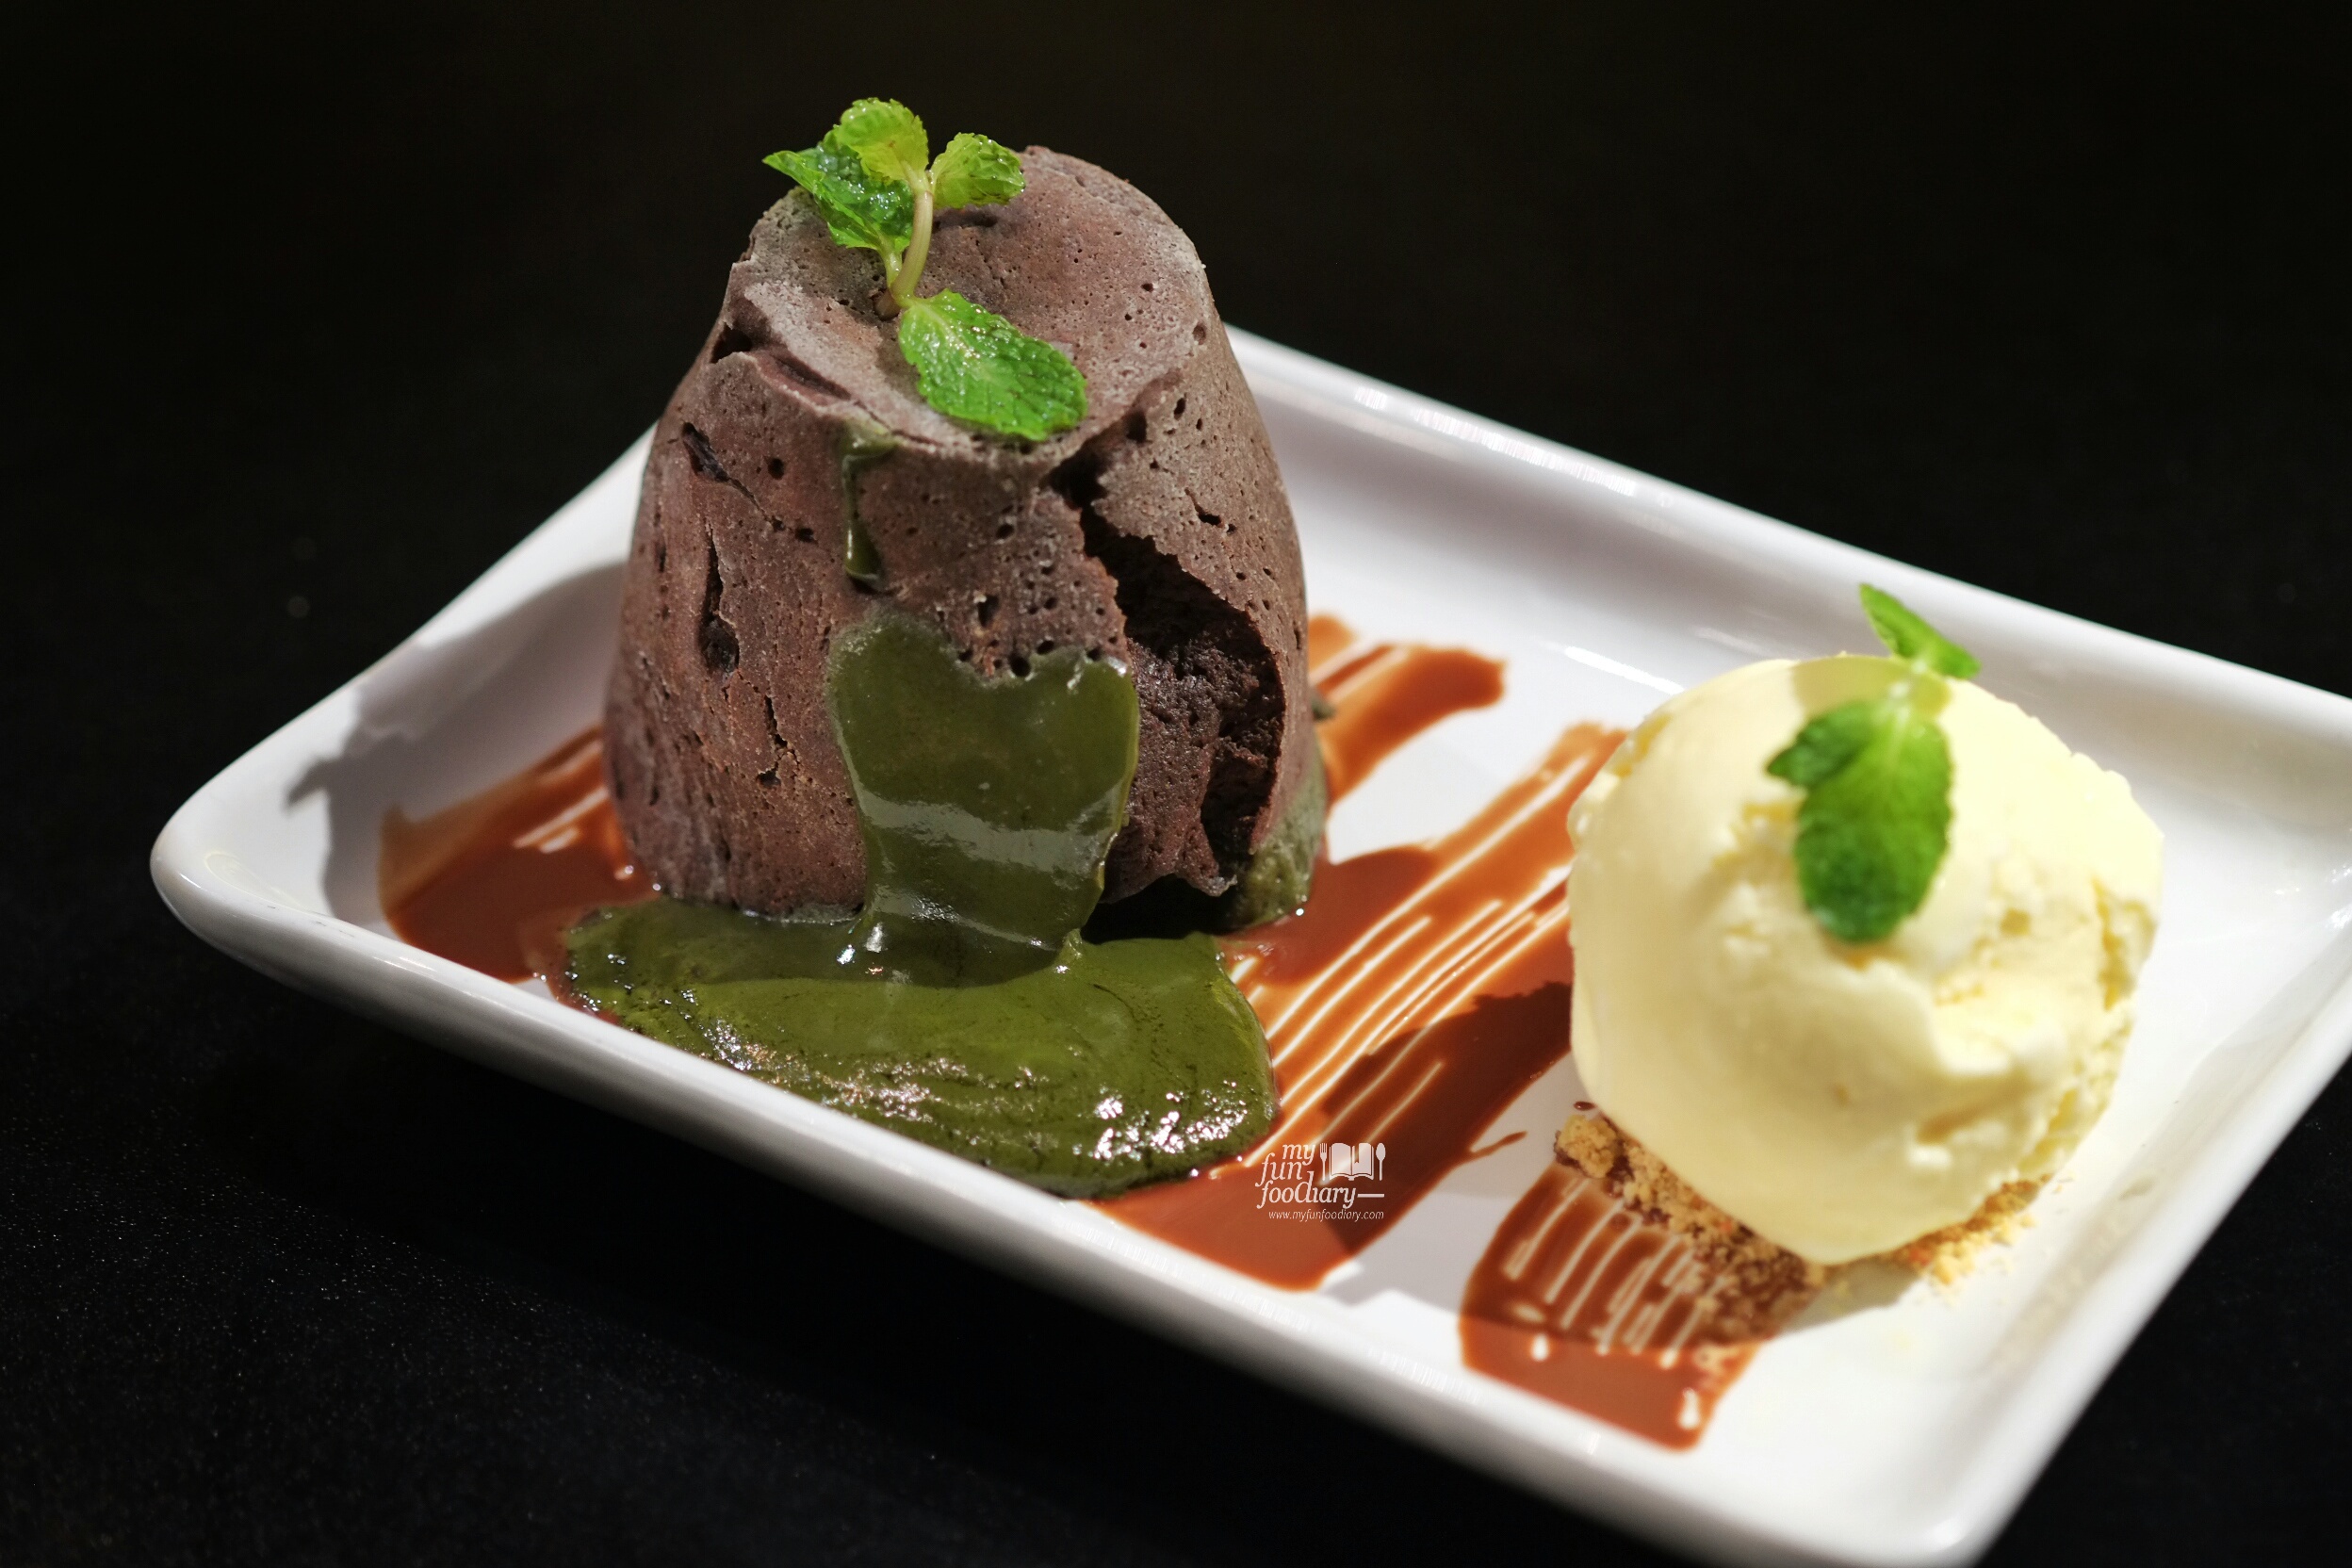 Green Tea Molten Cake at Commune Bistro & Grill by Myfunfoodiary 01